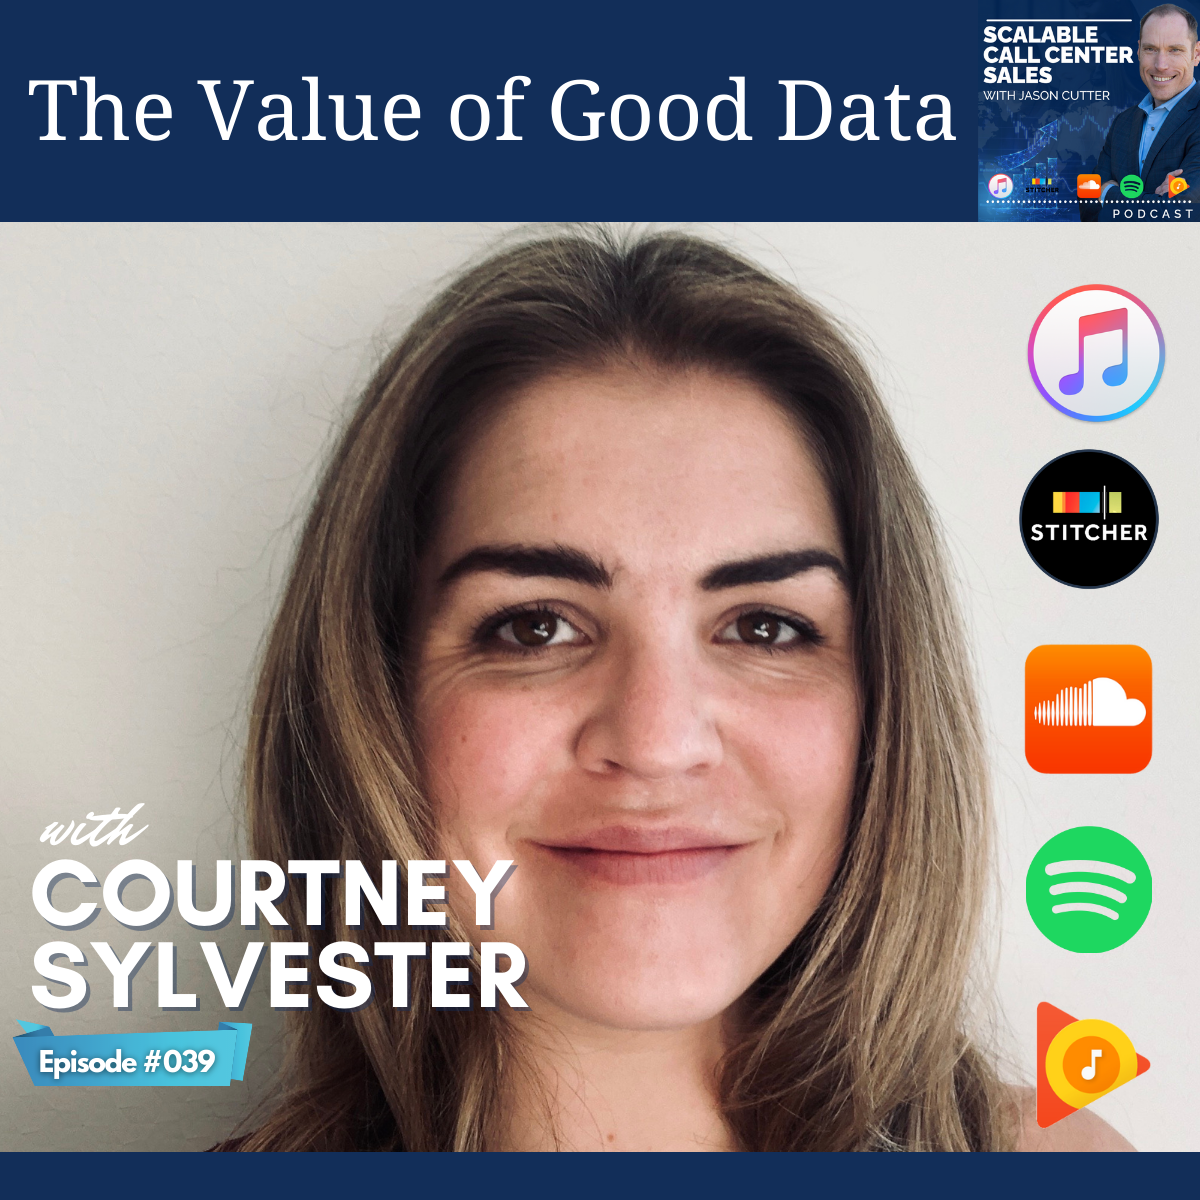 [039] The Value of Good Data, with Courtney Sylvester from SalesIntel